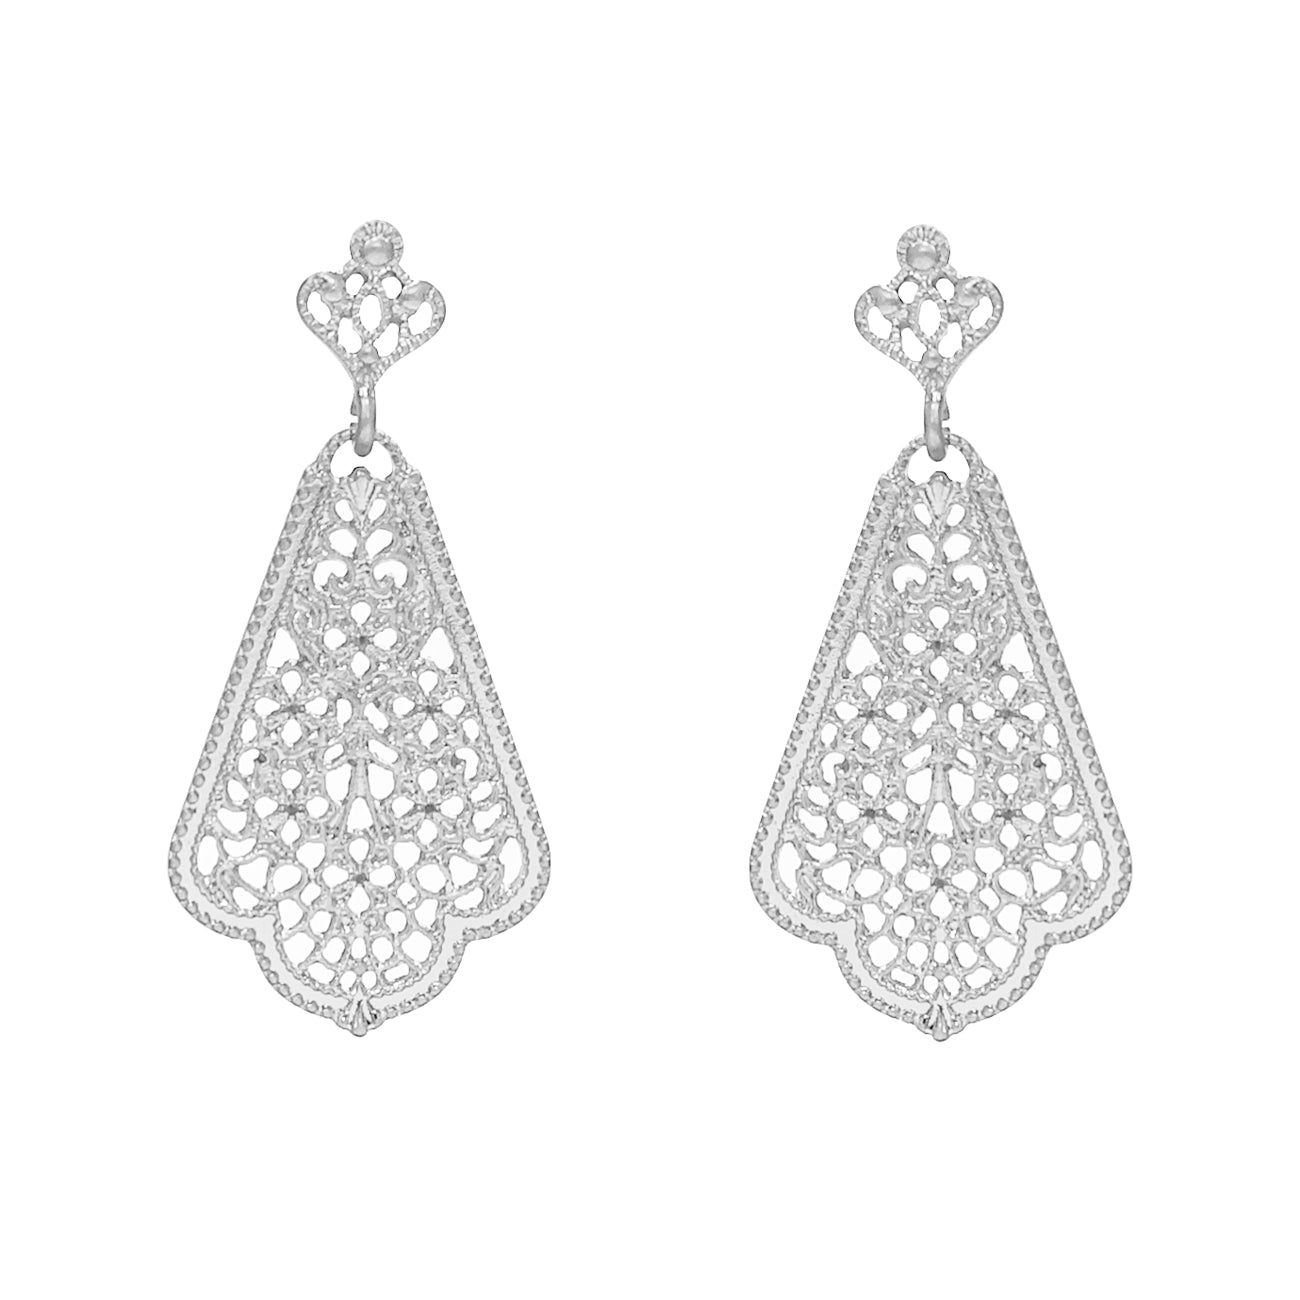 Completely Different Silver Dangle Earrings